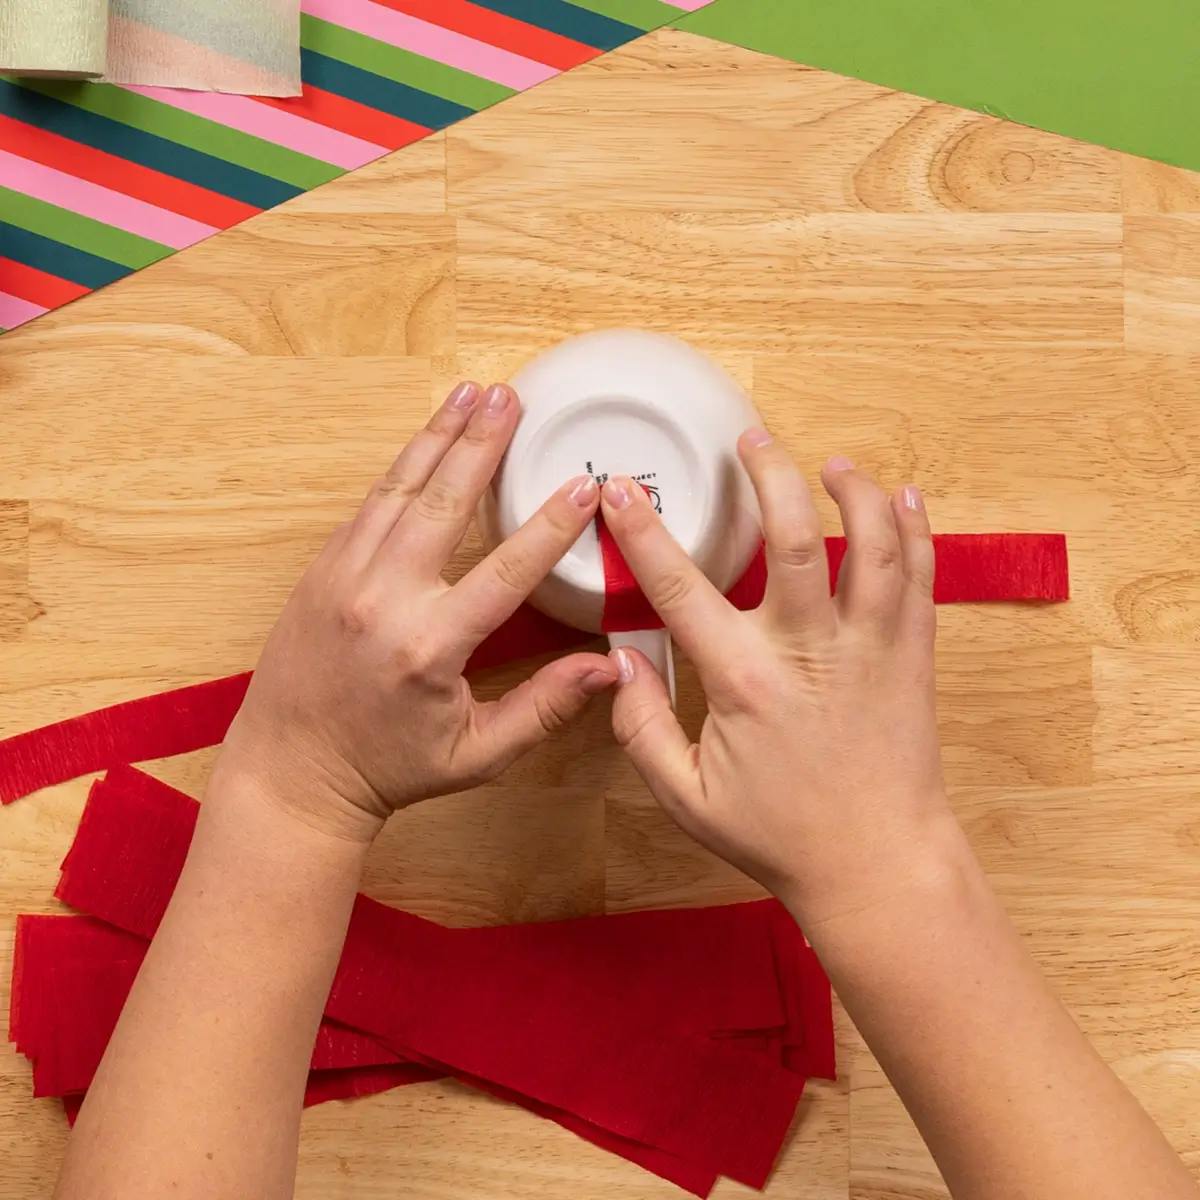 Attaching crepe paper to the bottom of a mug, in a tutorial on how to wrap a mug.